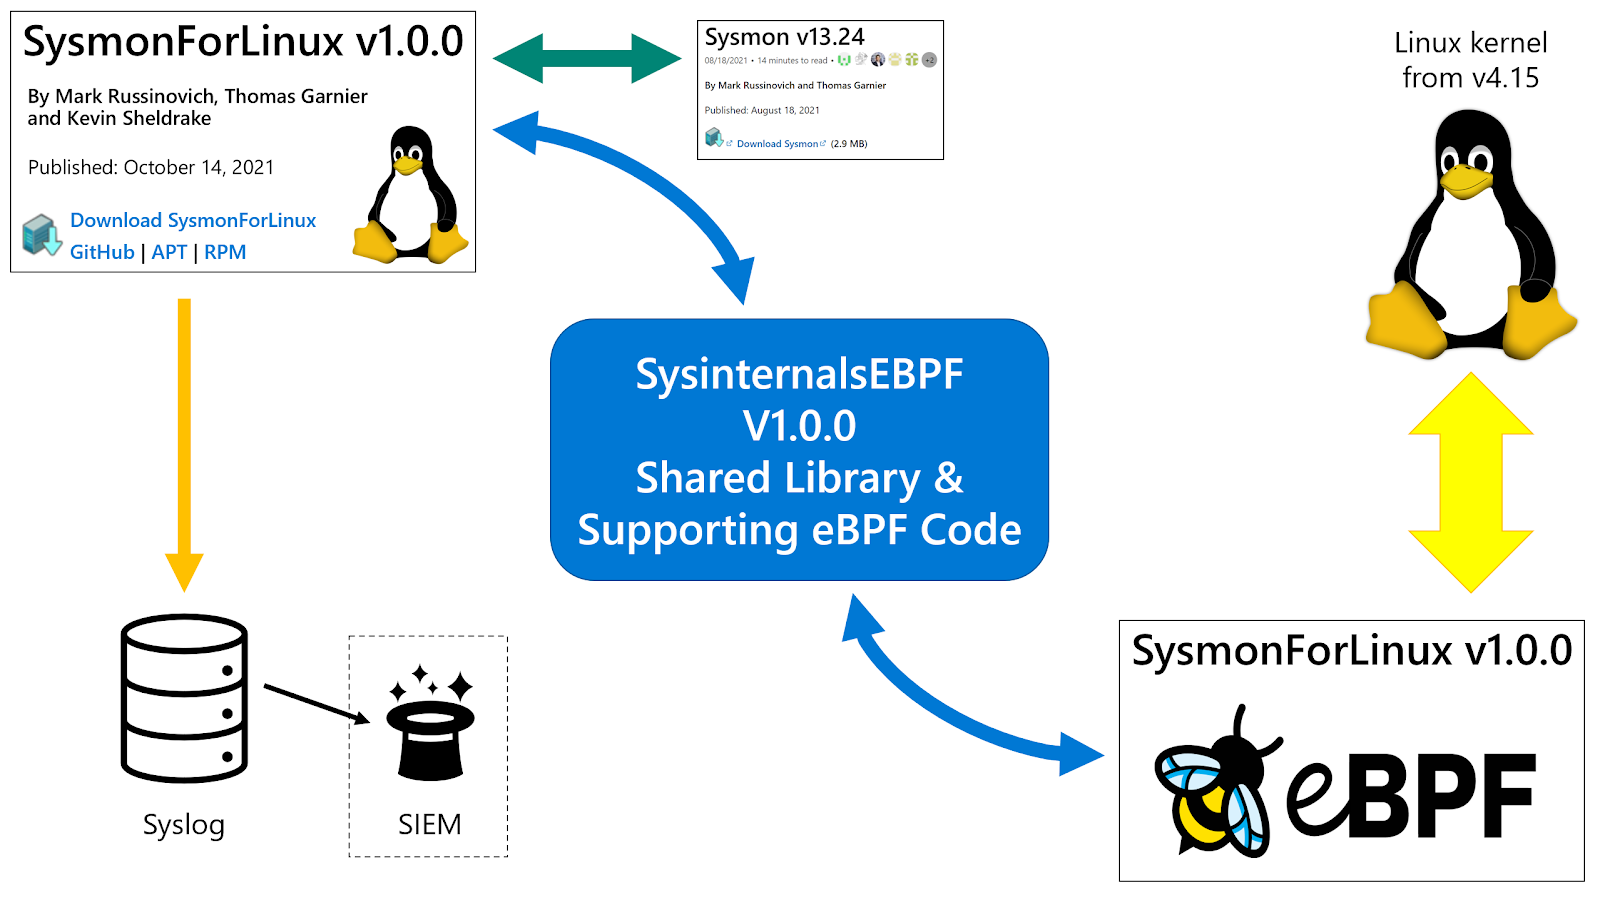 Image from "Lead Microsoft Engineer Kevin Sheldrake Brings Sysmon to Linux"